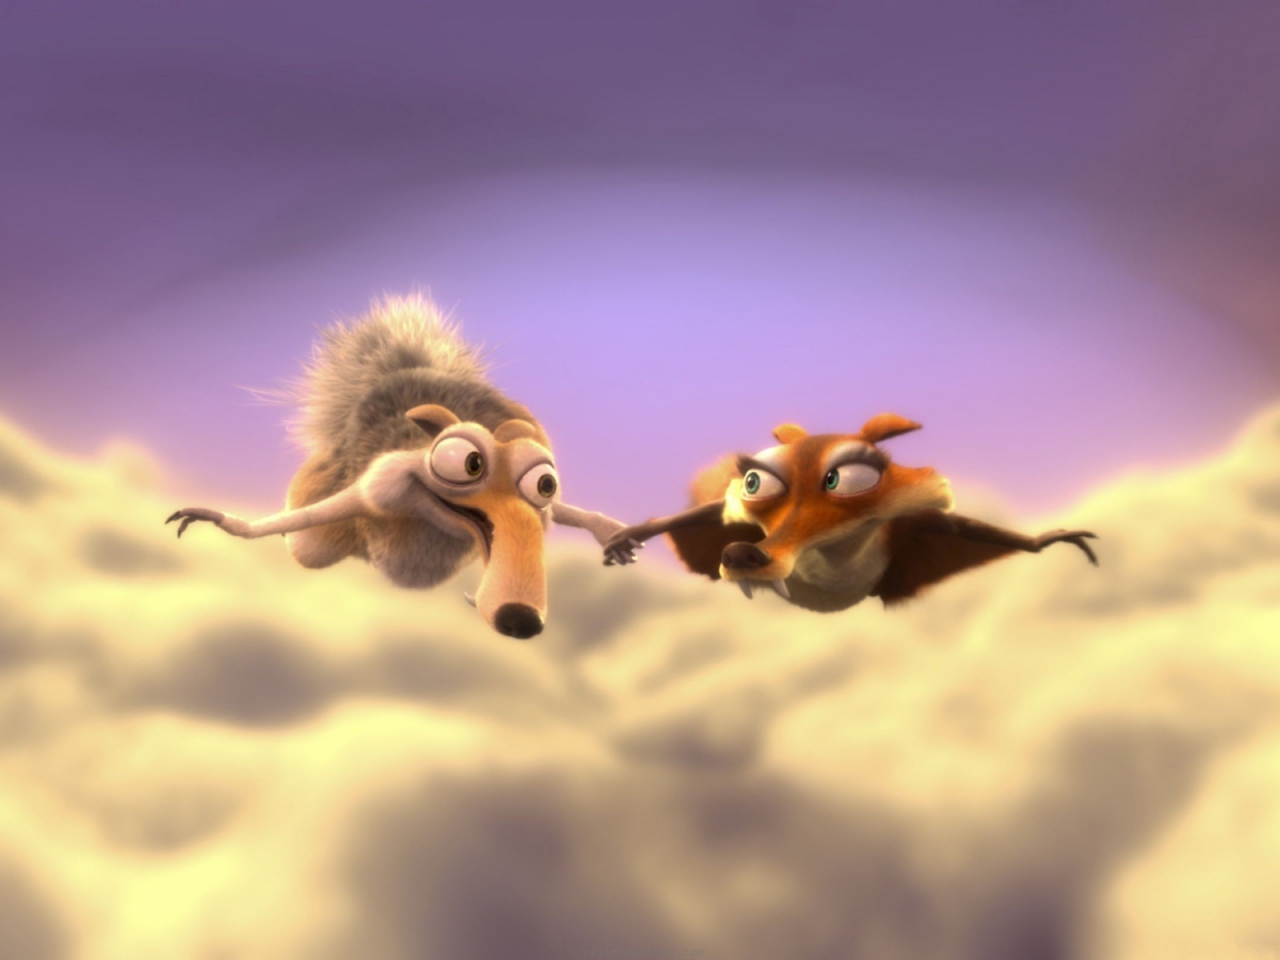 Scrat and Scratte for 1280 x 960 resolution